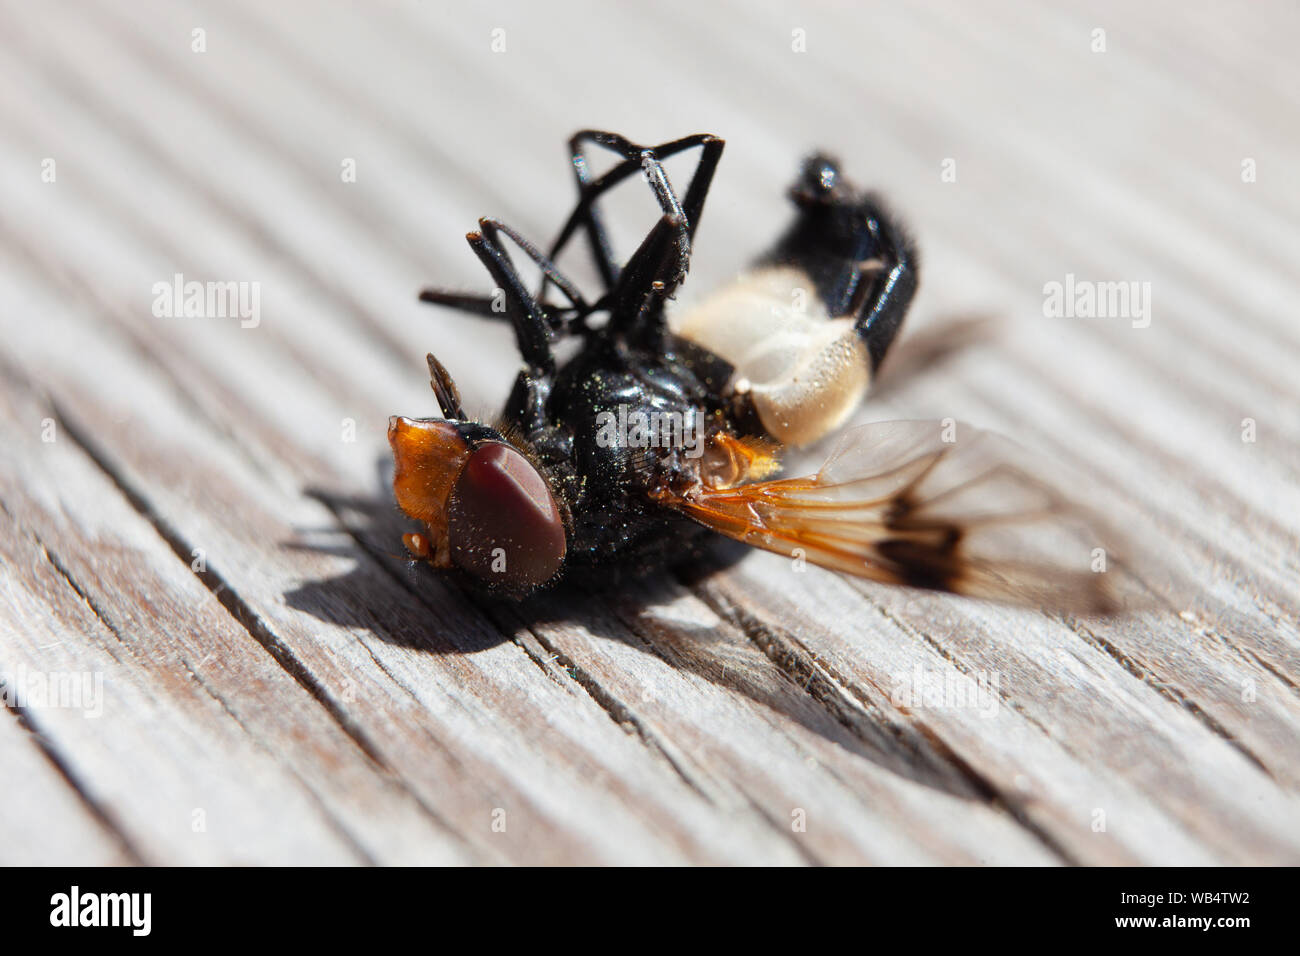 Dead fly on a wooden table. death, end of life concept. Stock Photo